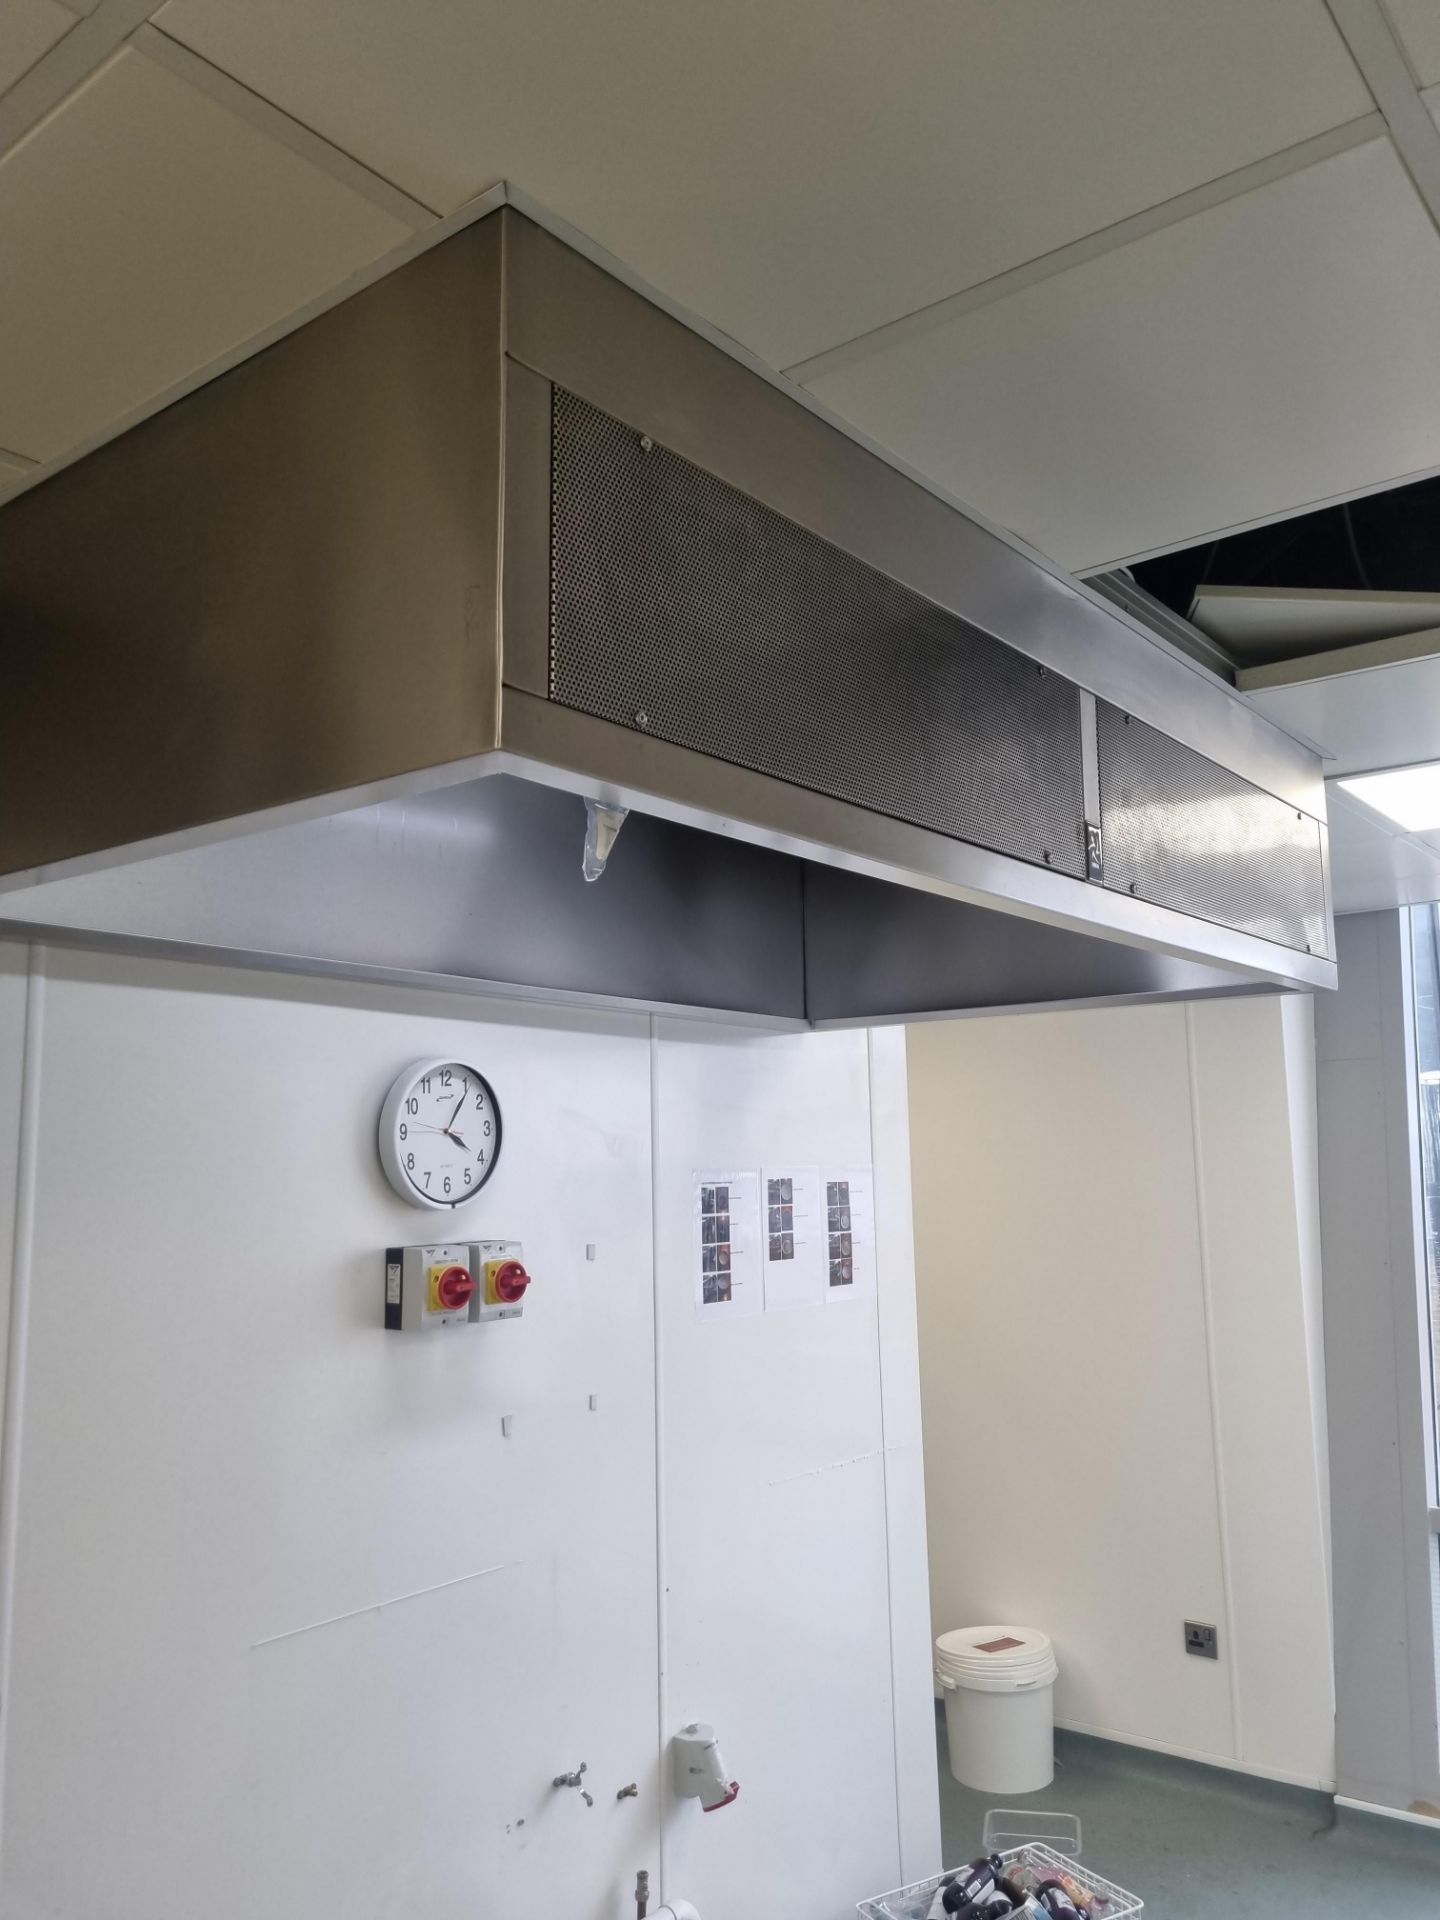 HMA Ventilation stainless steel canopy manufactured from 304 grade Stainless Steel 200 x 115cm (